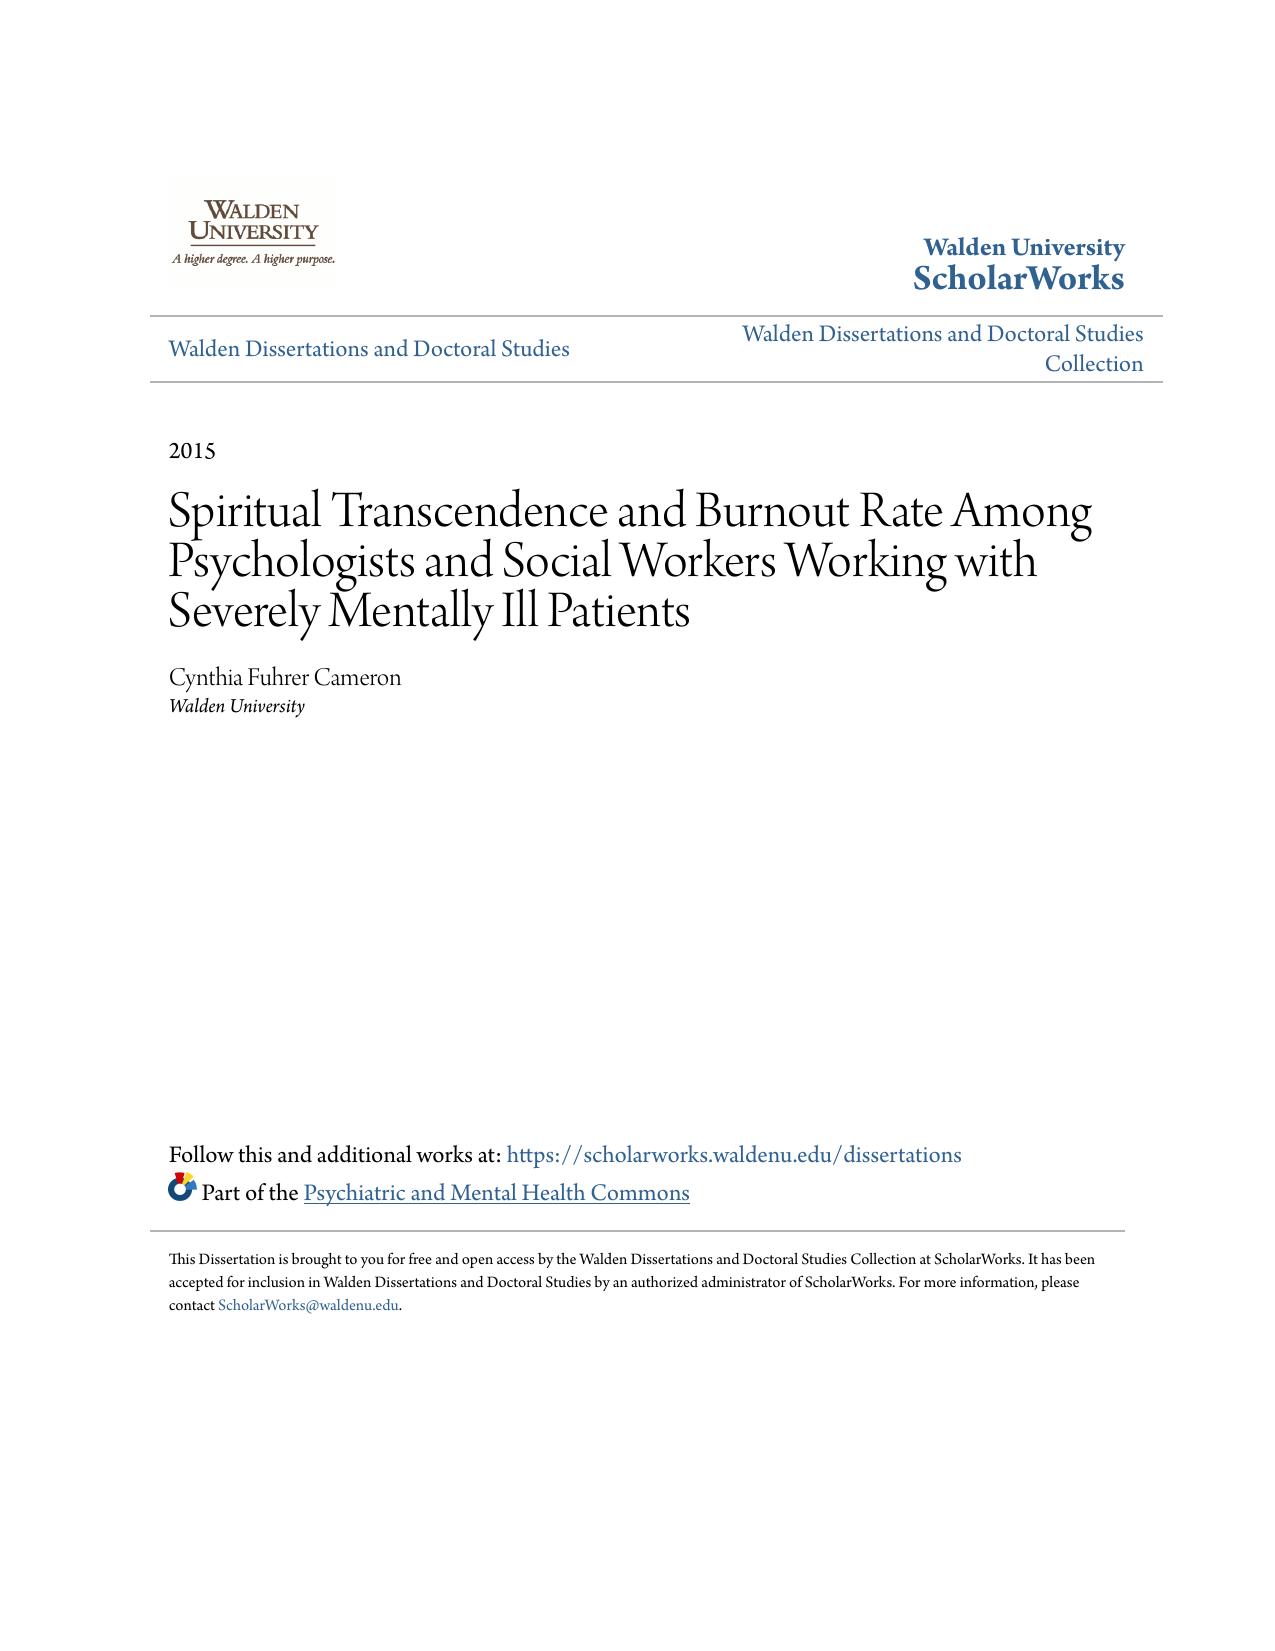 Spiritual Transcendence and Burnout Rate Among Psychologists and Social Workers Working with Severely Mentally Ill Patients